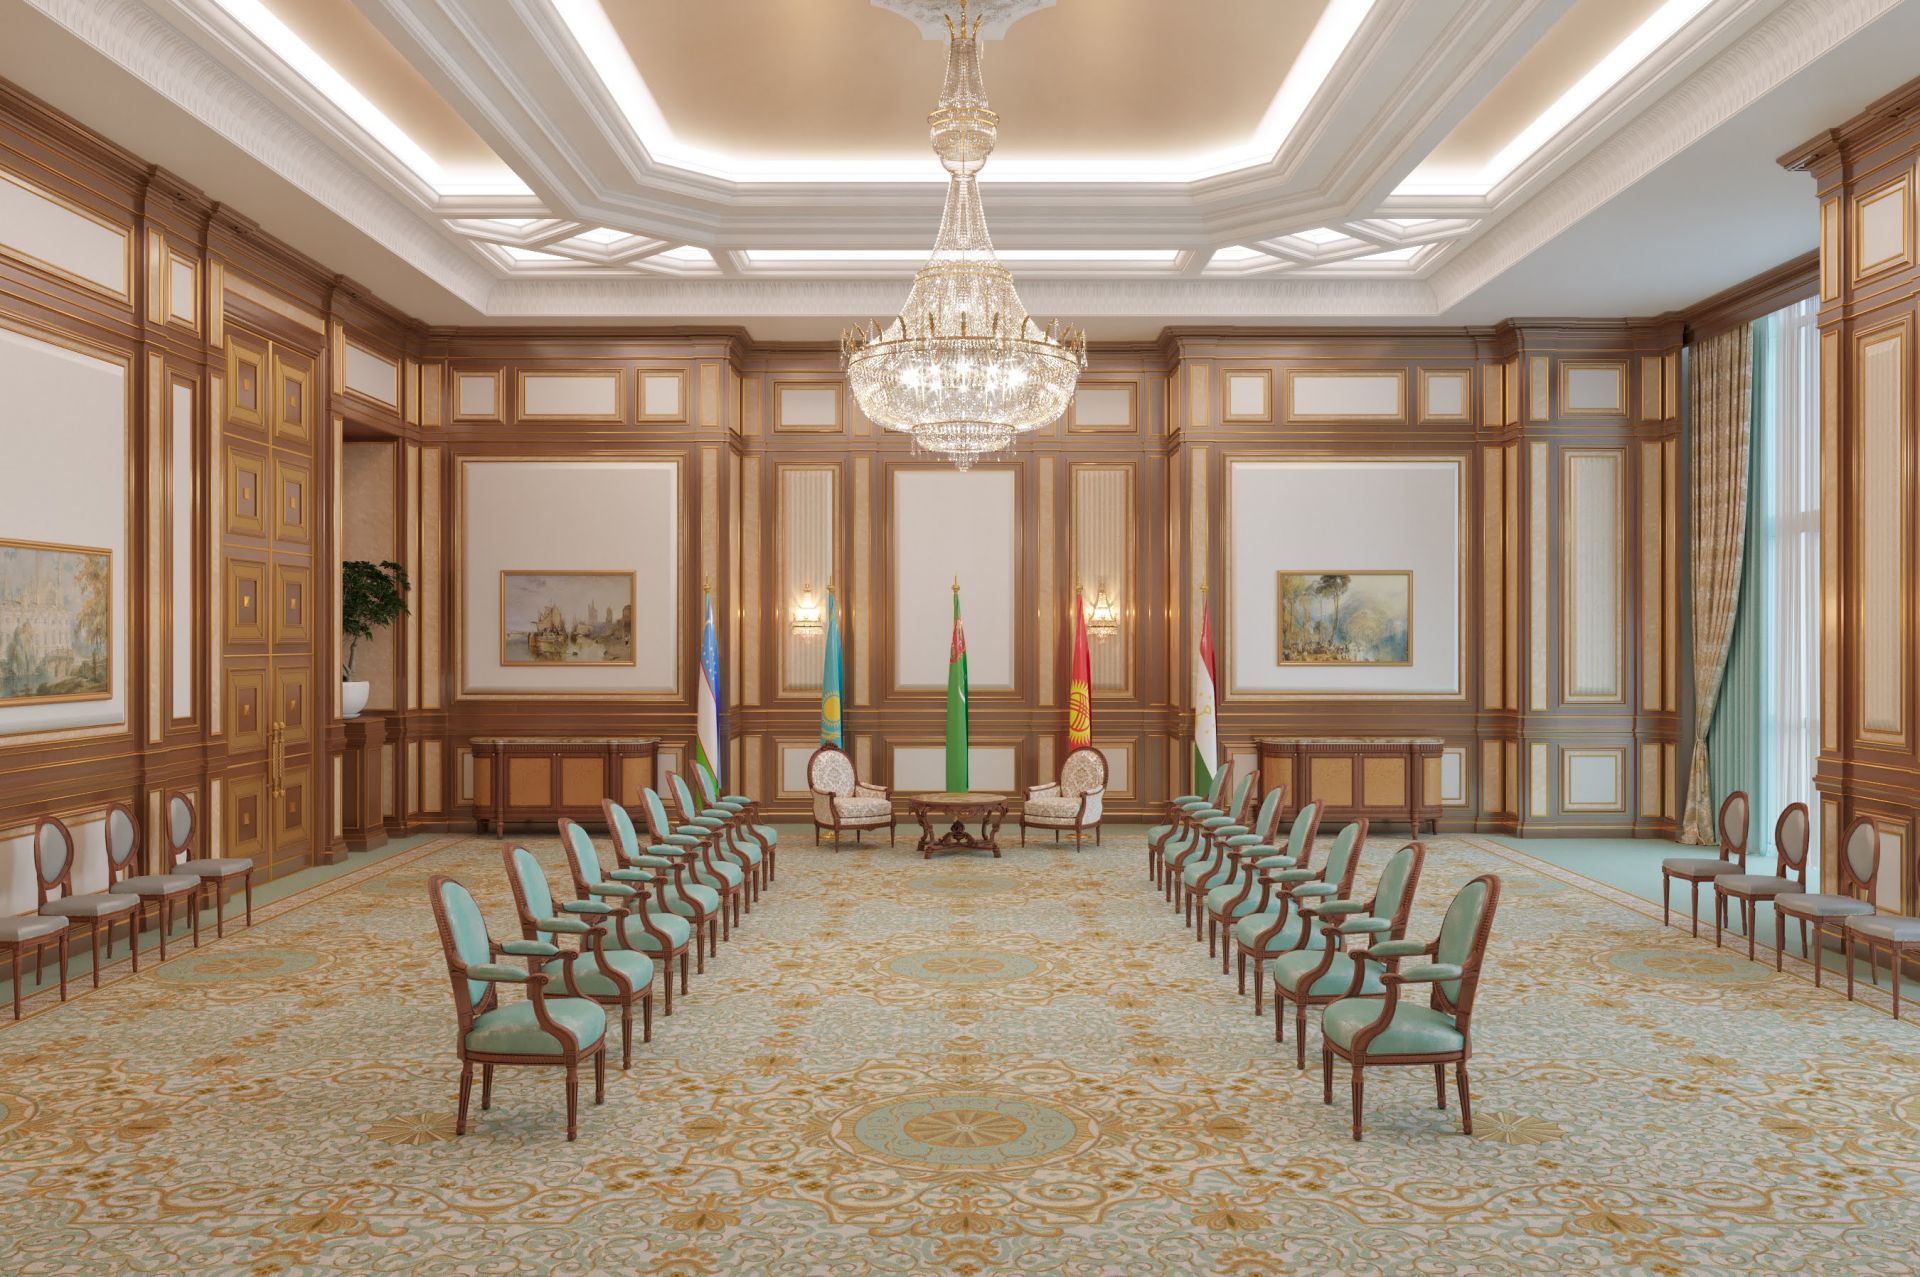 Meeting room, classic-style interior